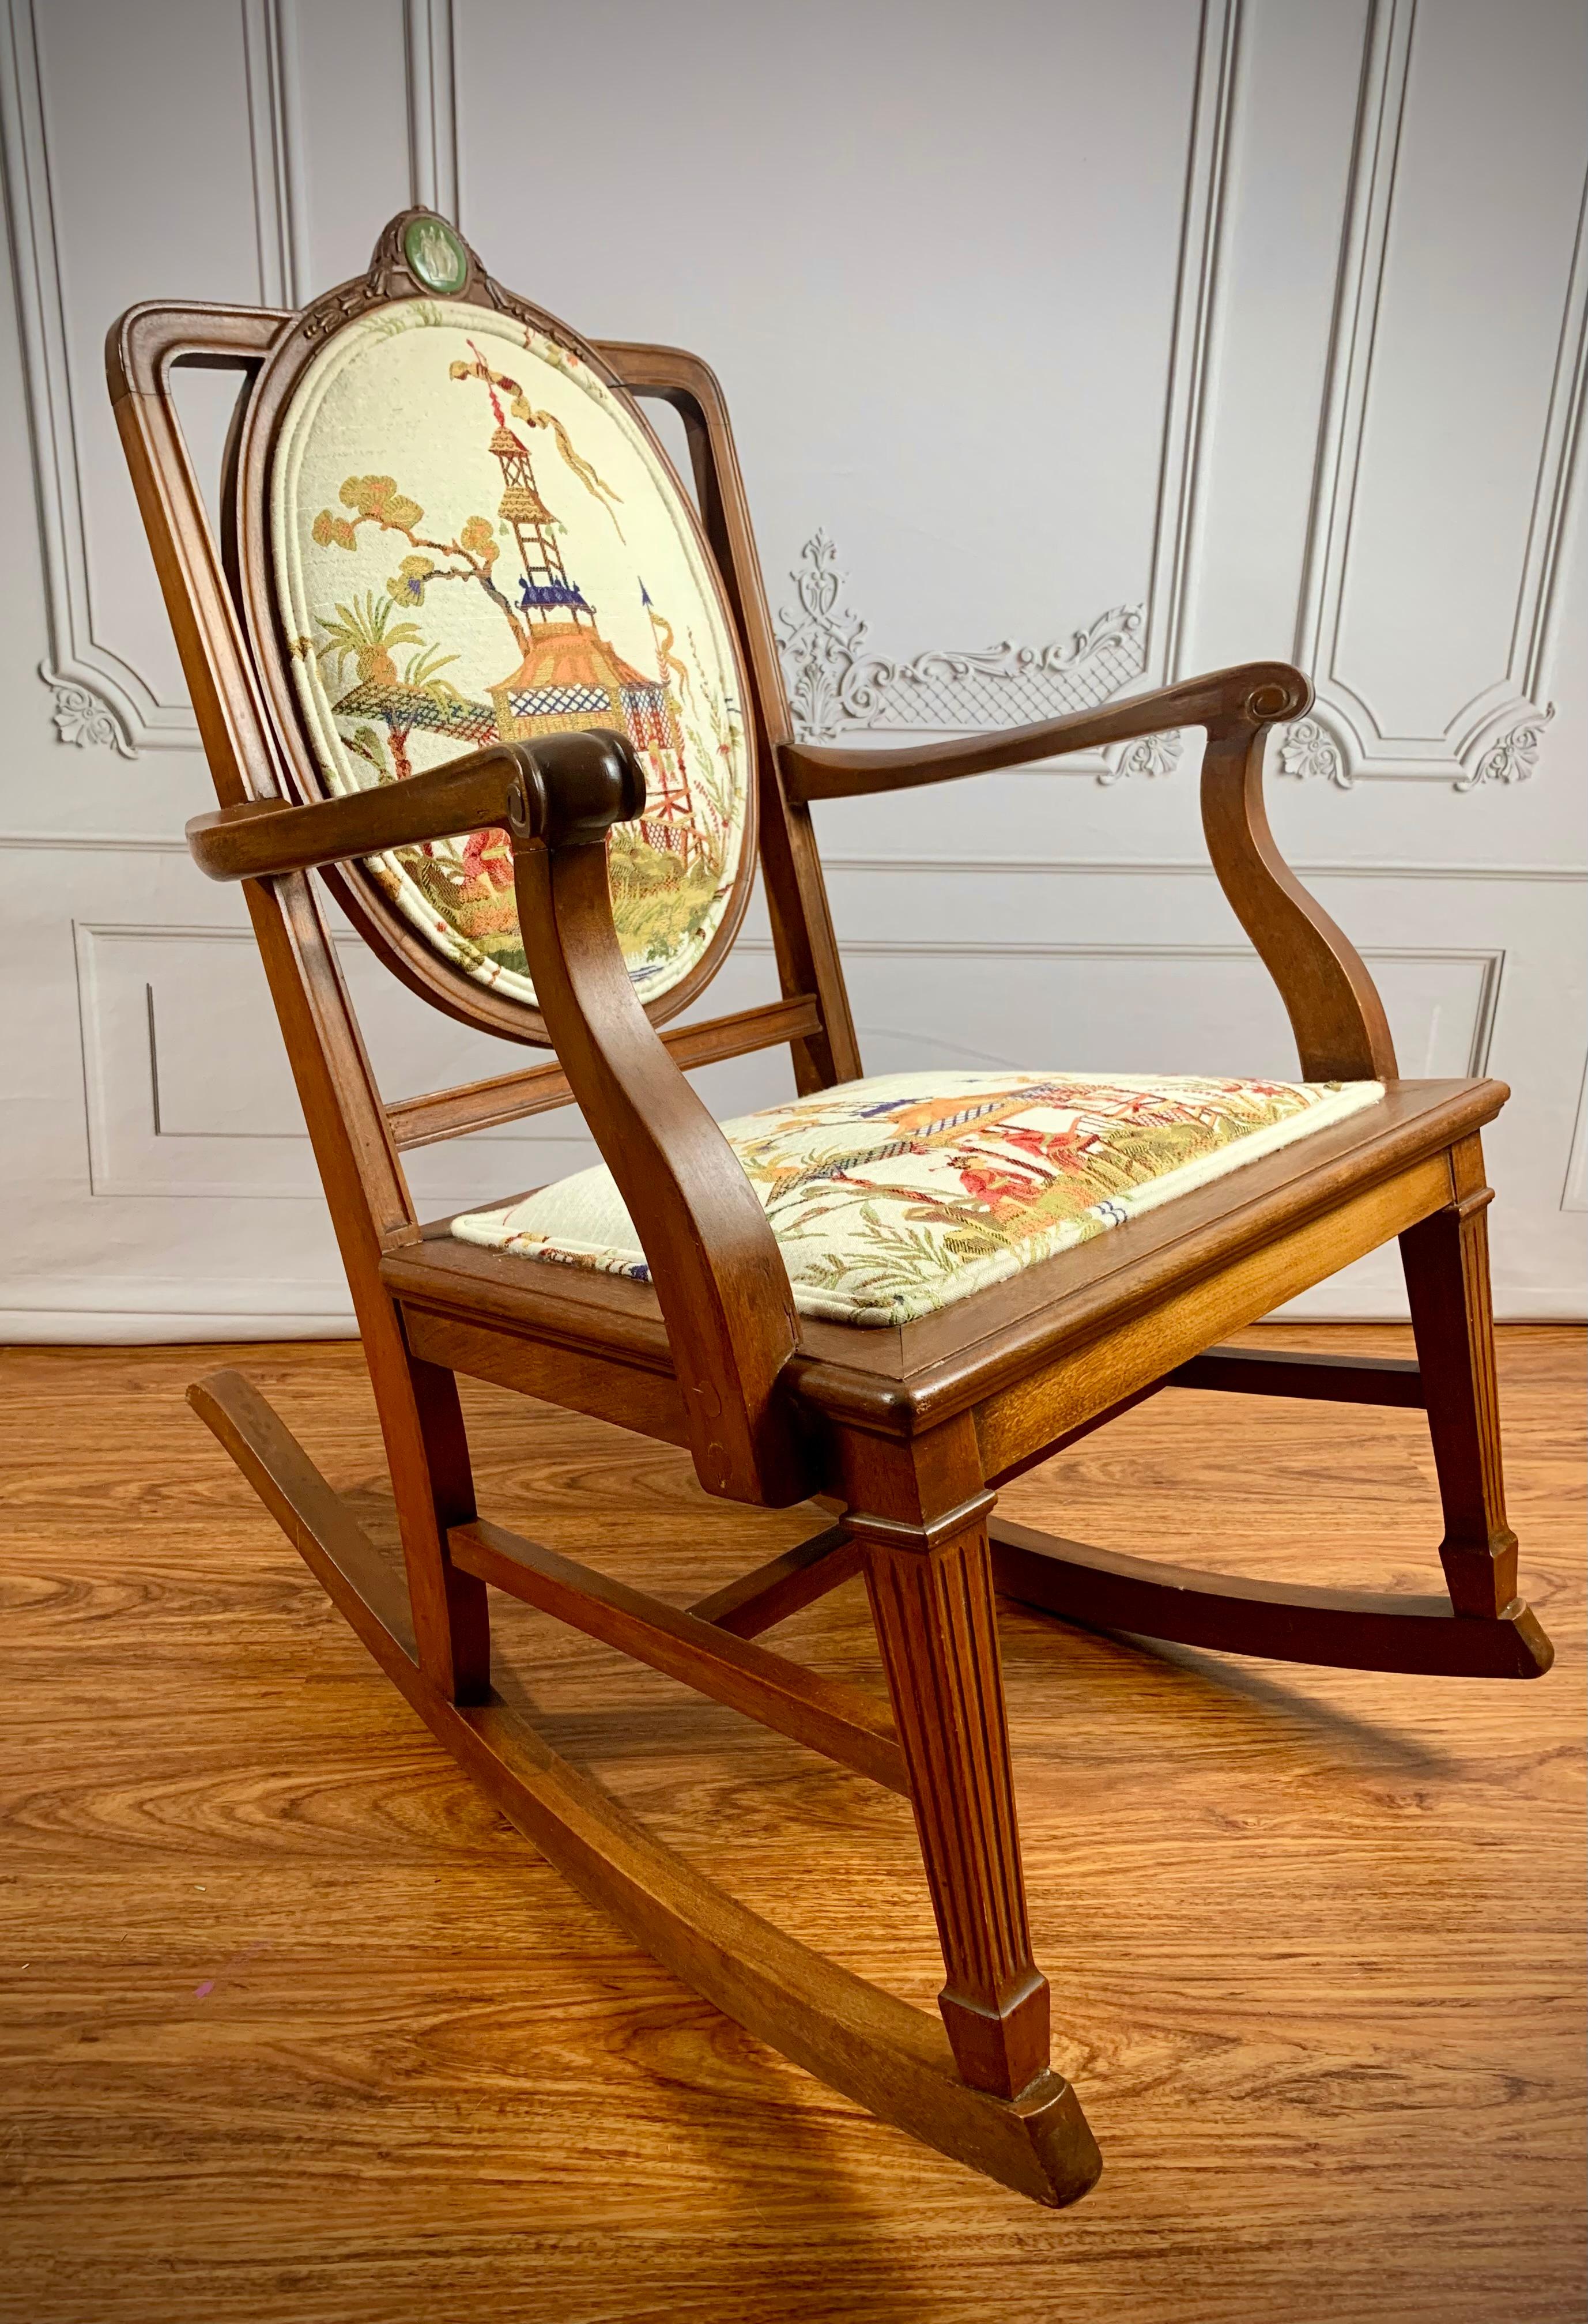 Late 19th century Neoclassical style hardwood rocker with hand-carved armrests, fluted legs, hand-lathed screws. 

Custom upholstery in a beautiful ivory linen featuring a woven Chinoiserie pattern. Crowned with a rare 18th century World Tour